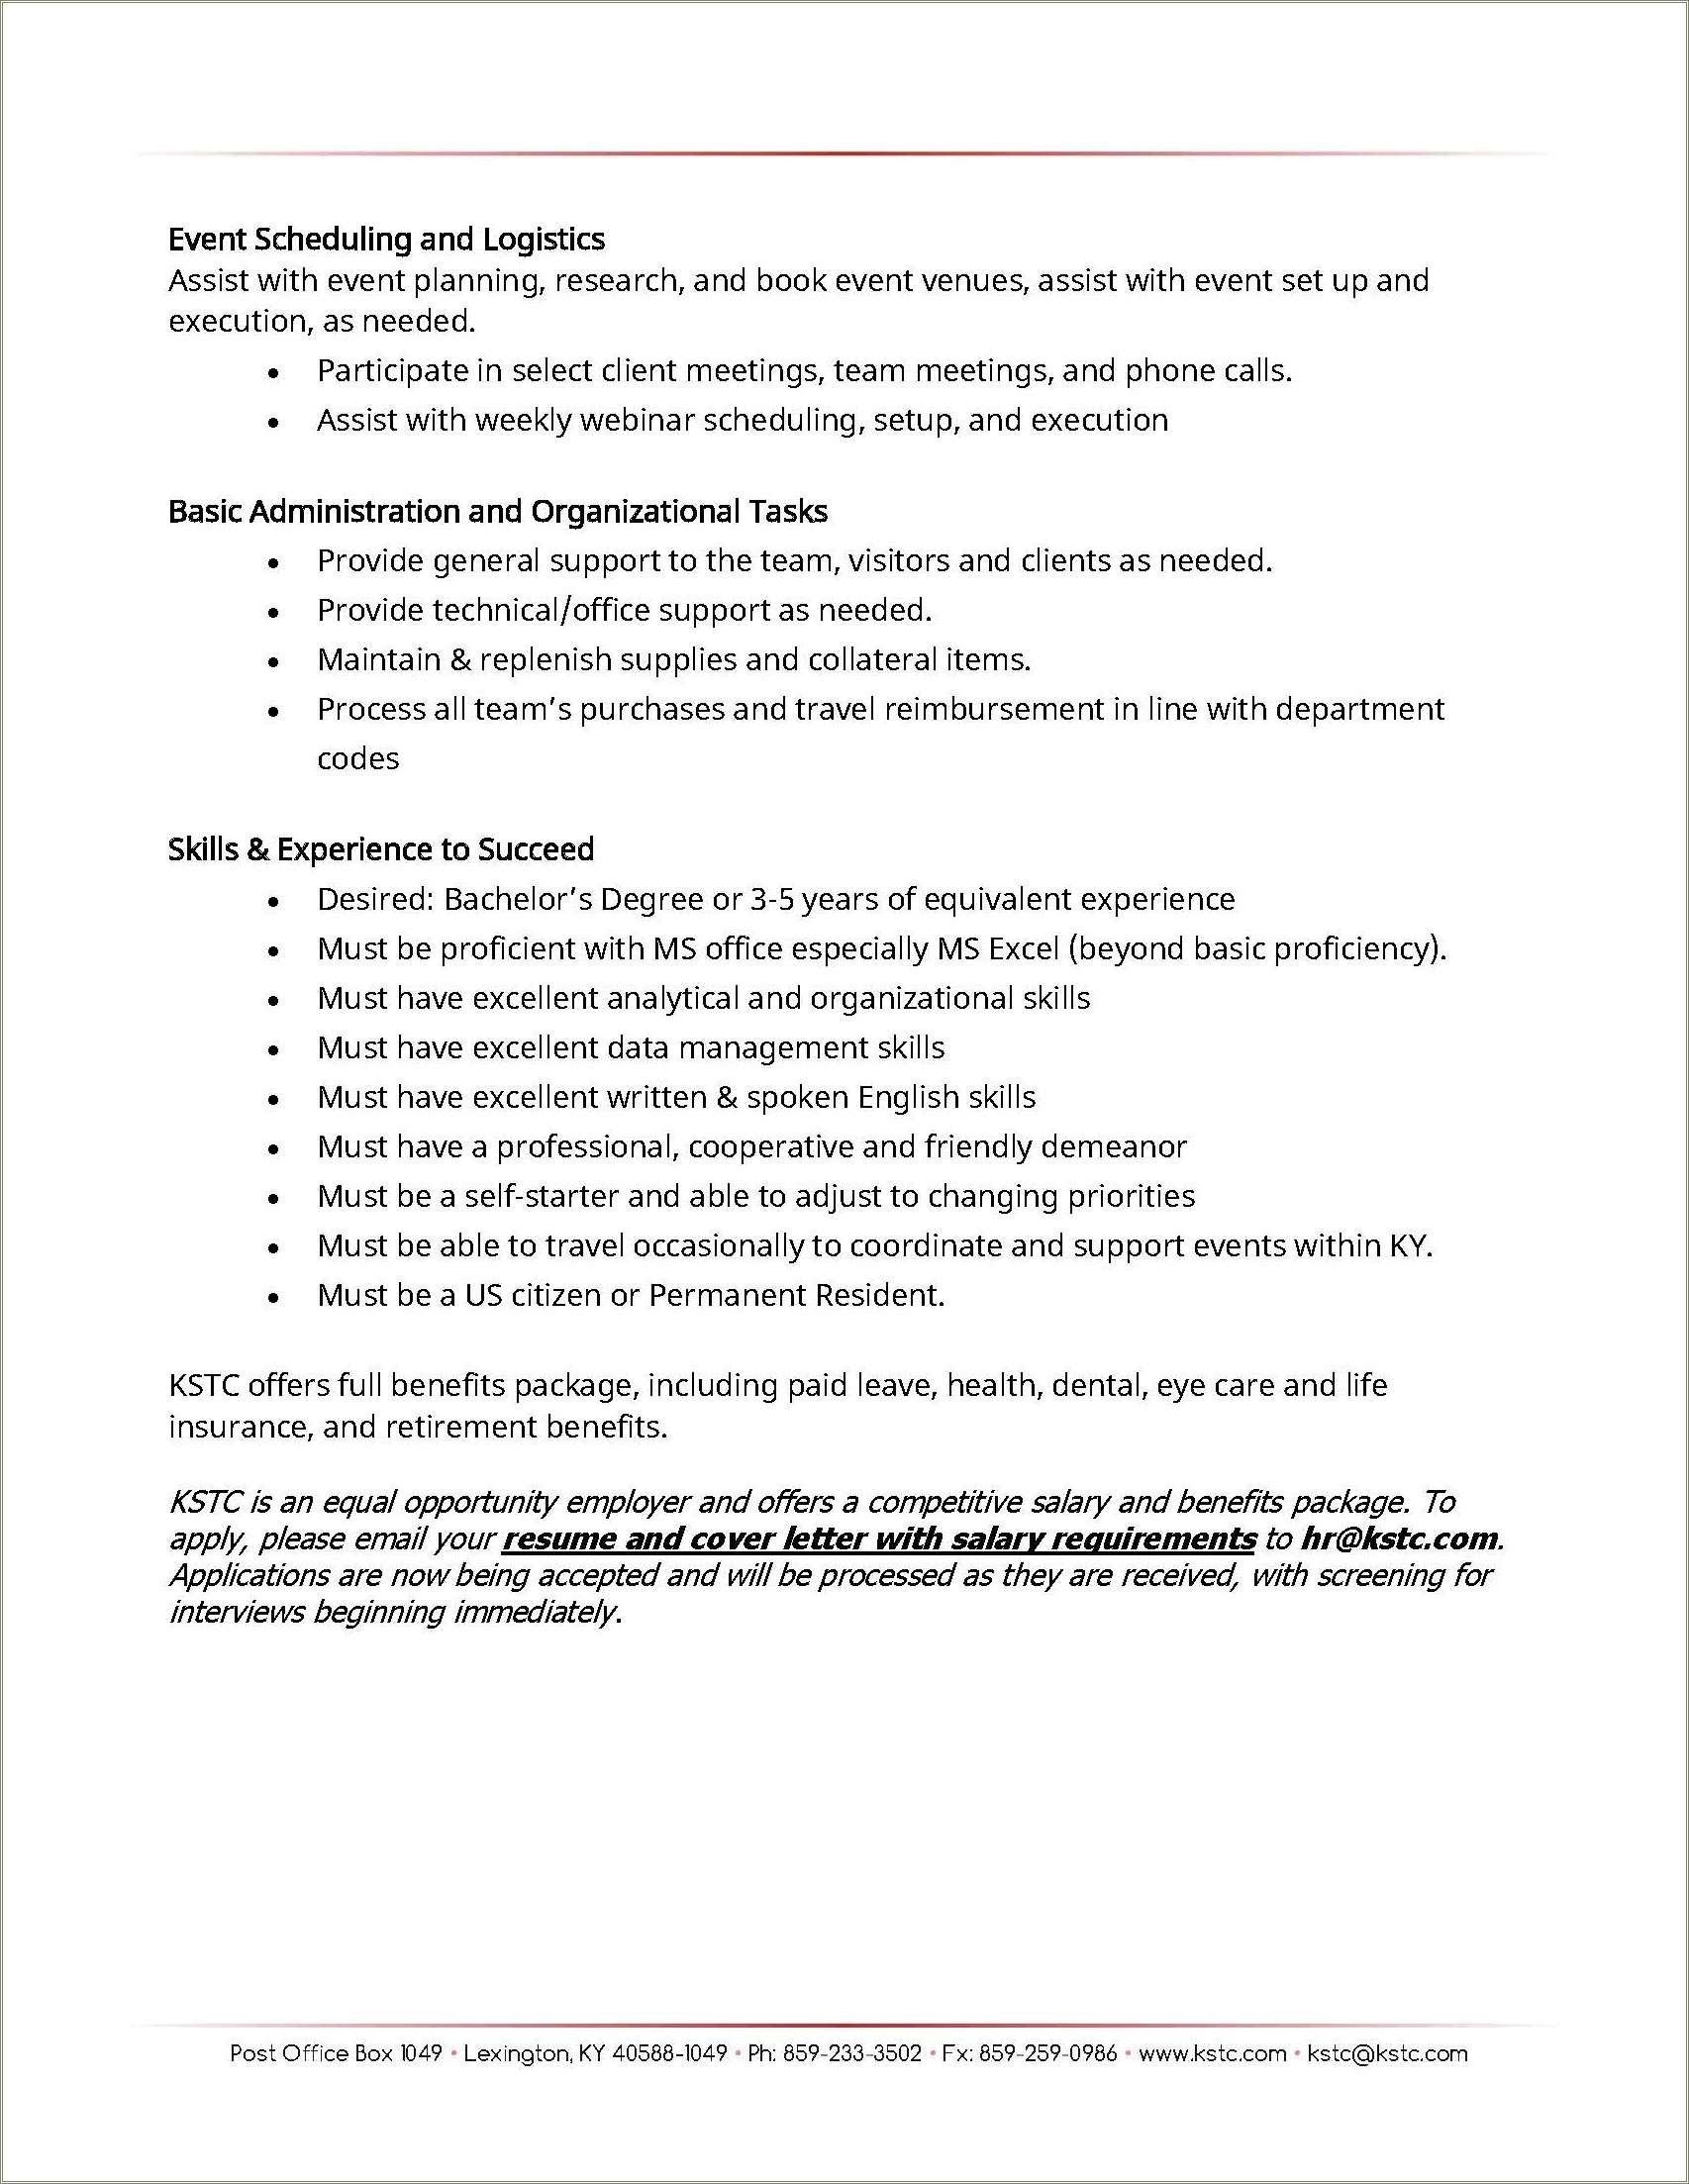 Where To Put Salary Expectations In Resume